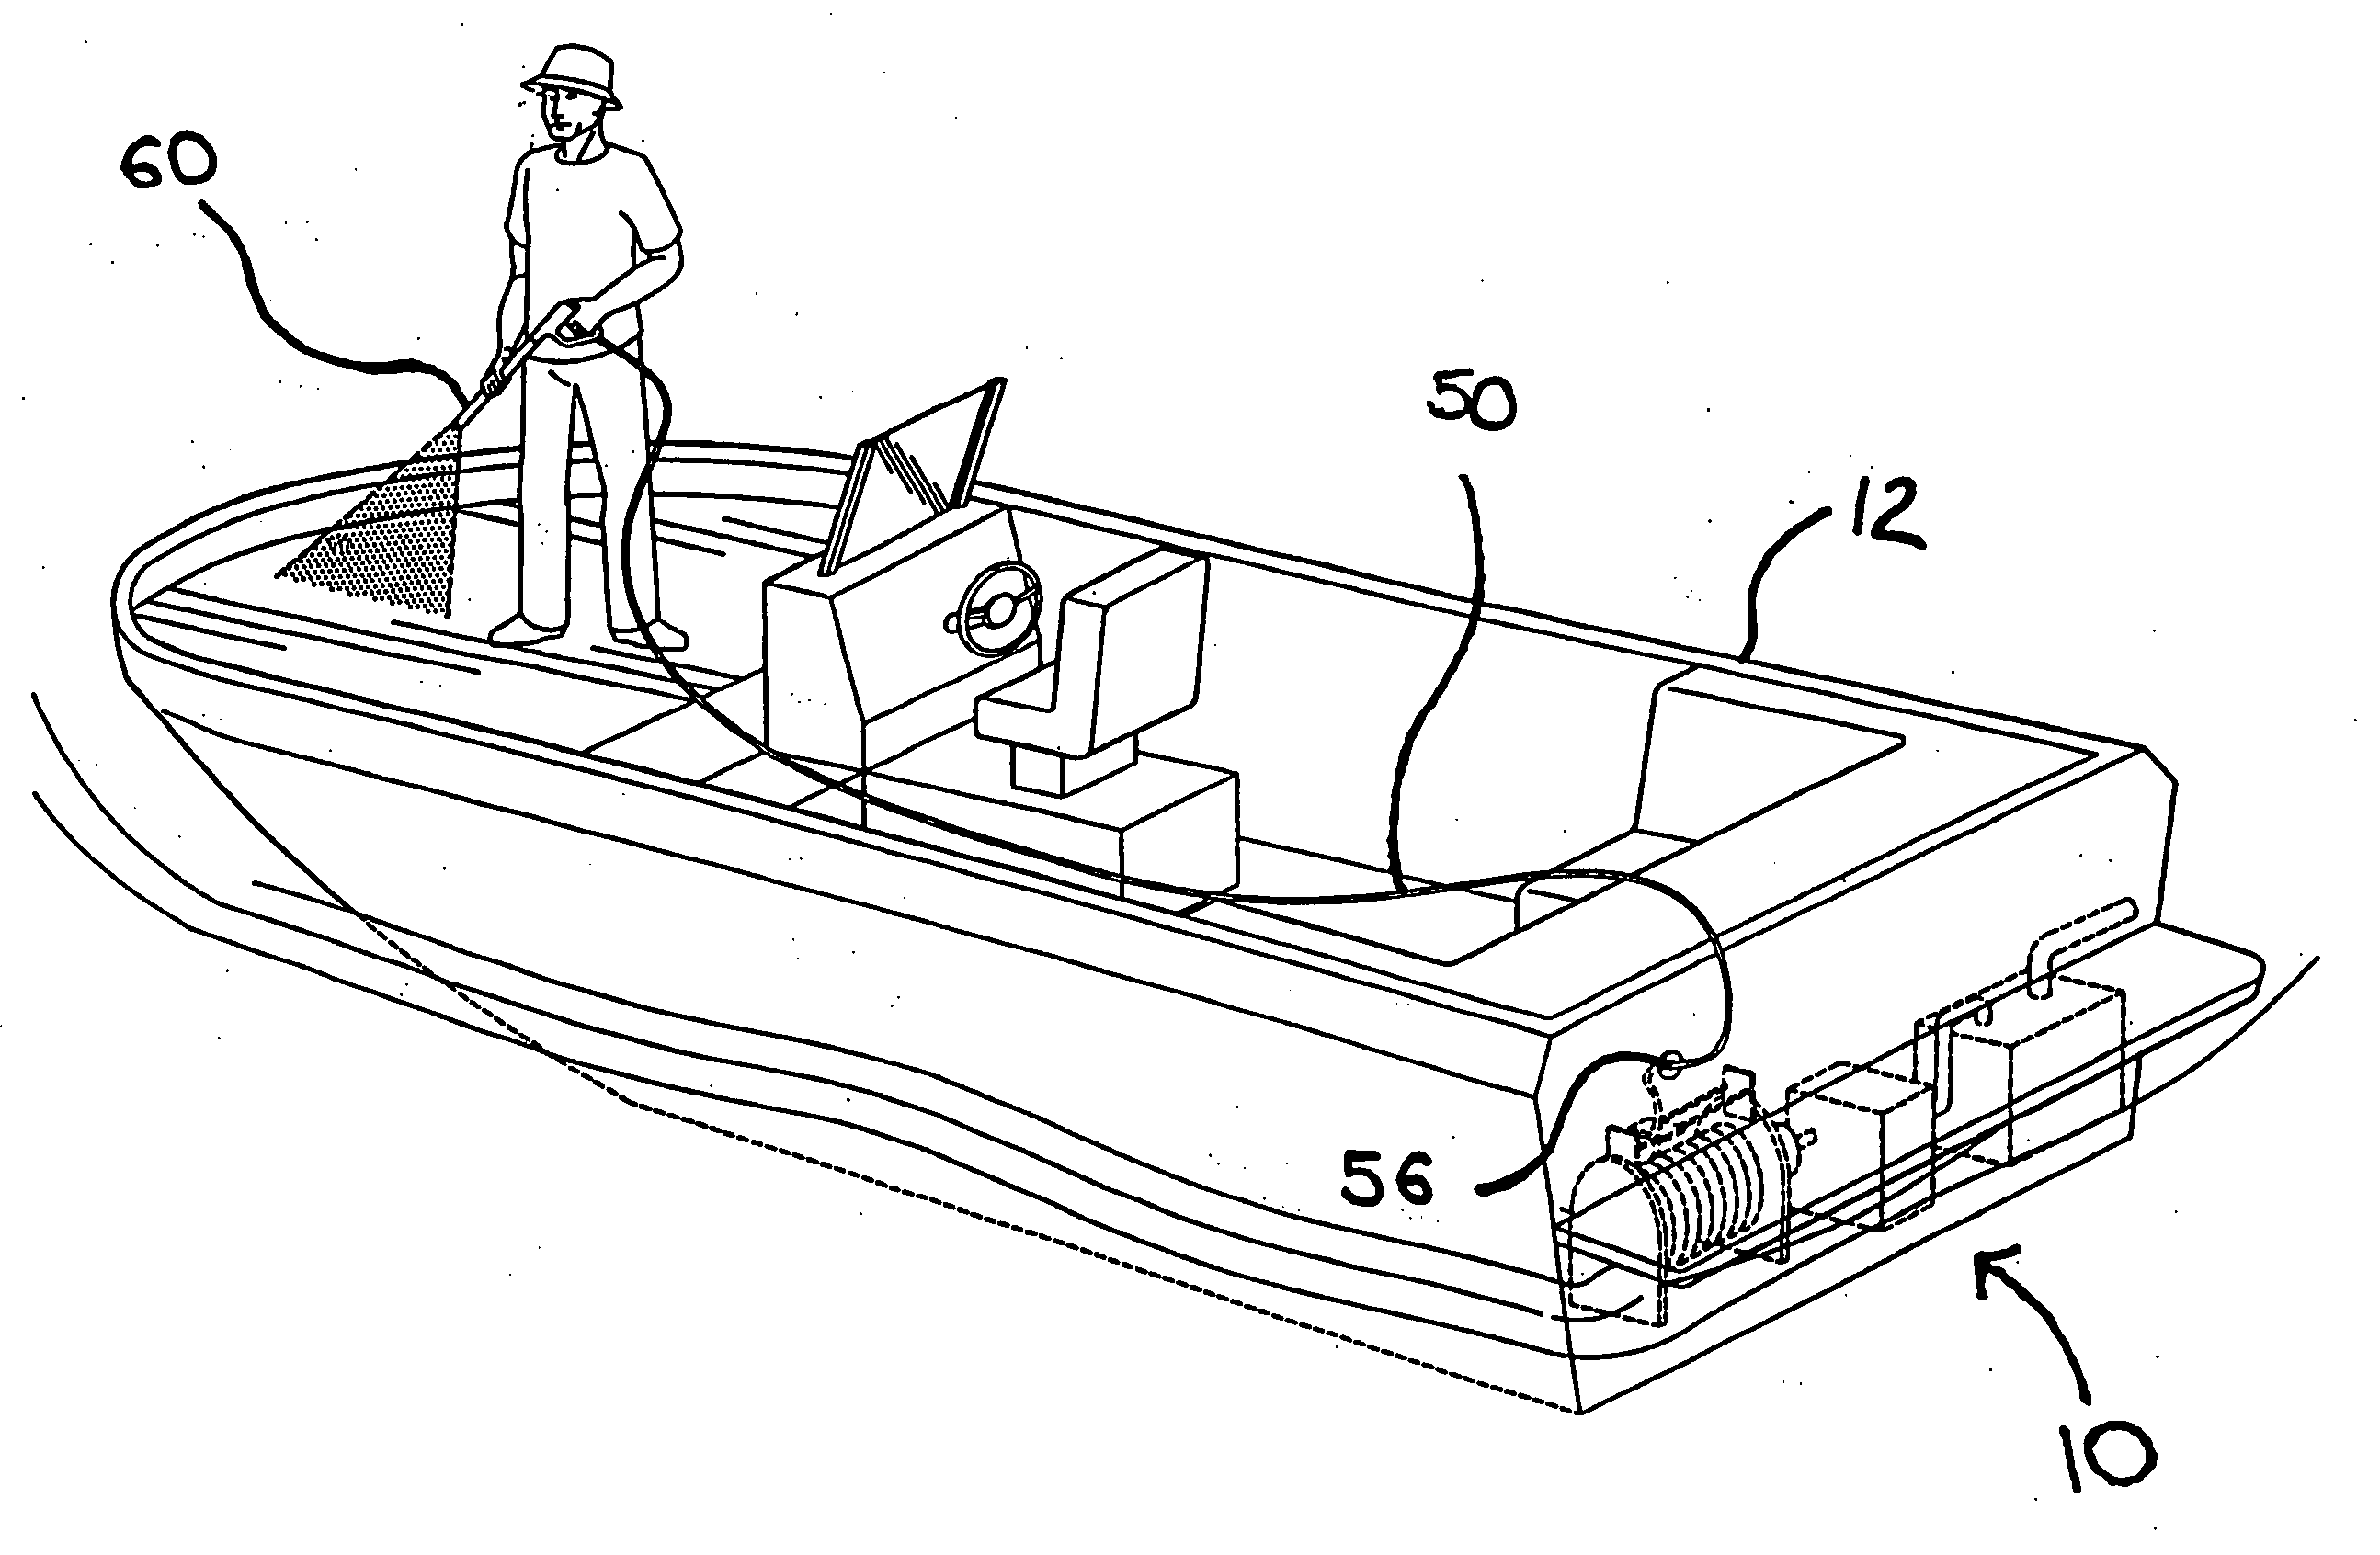 Boat/RV mounted pressure-wash system